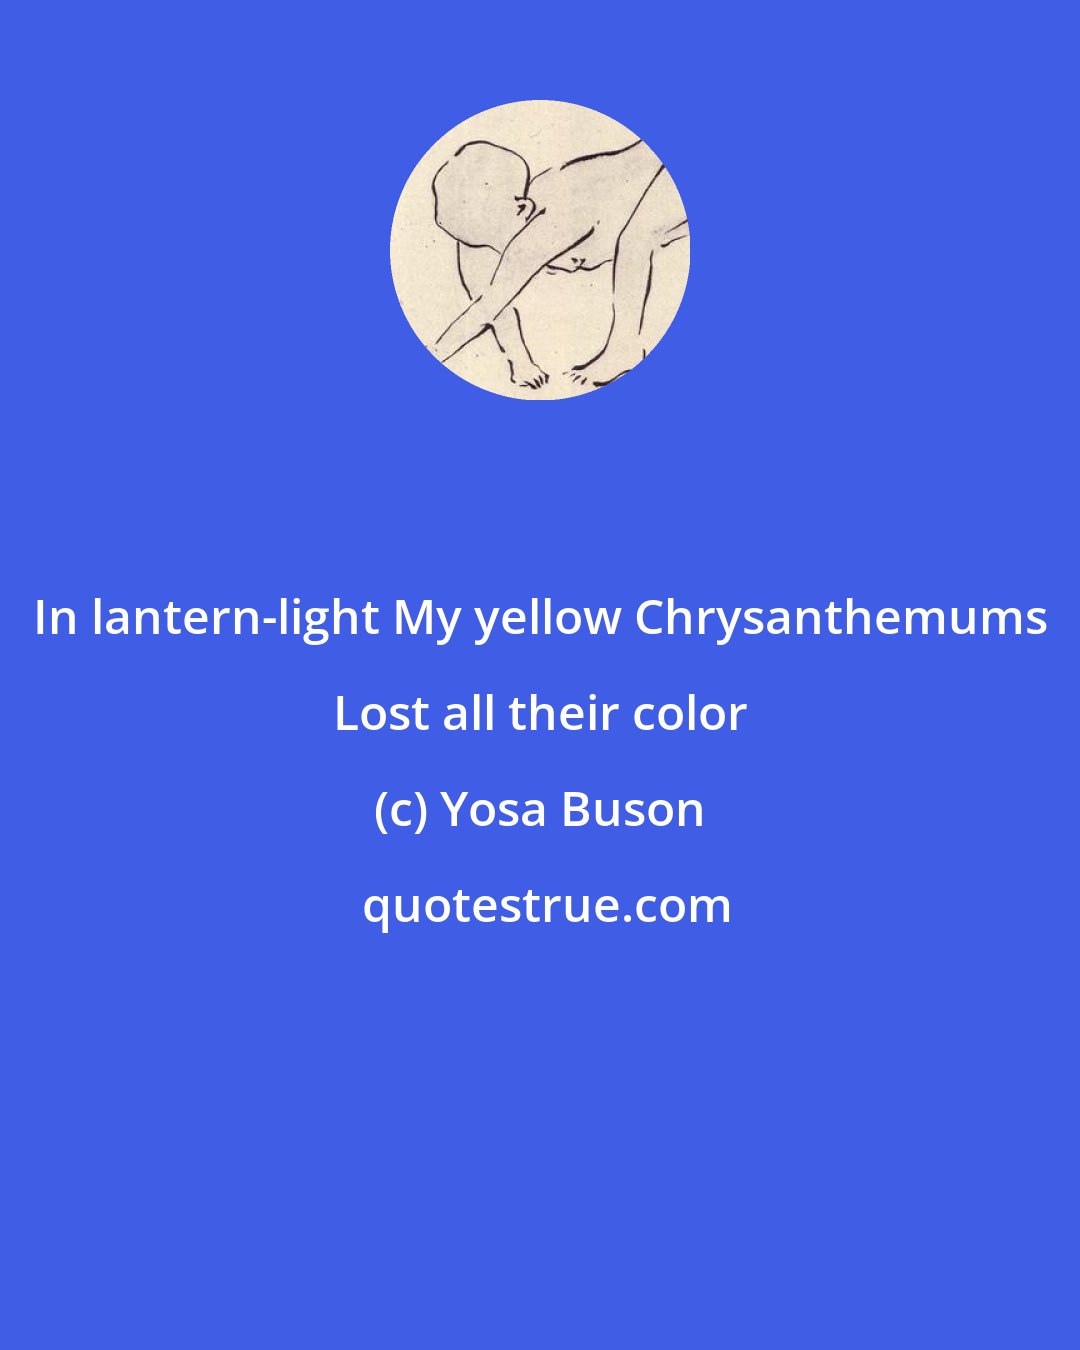 Yosa Buson: In lantern-light My yellow Chrysanthemums Lost all their color